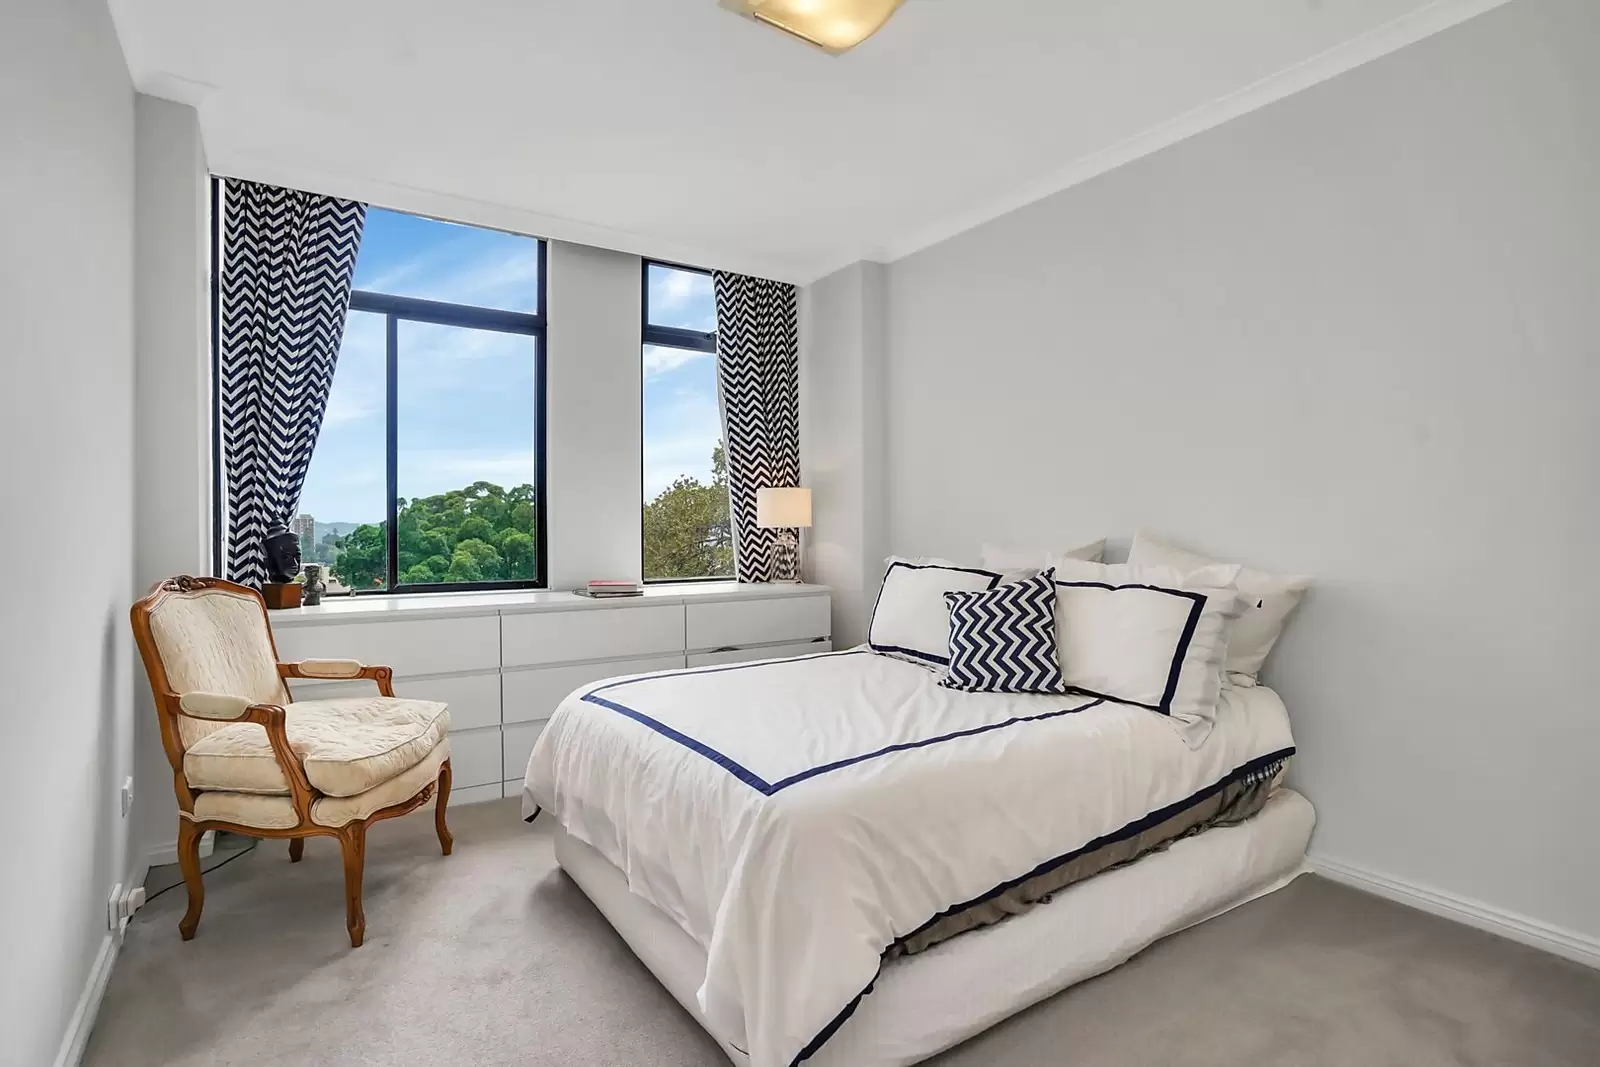 Photo #4: 701/170 Ocean Street, Edgecliff - Sold by Sydney Sotheby's International Realty